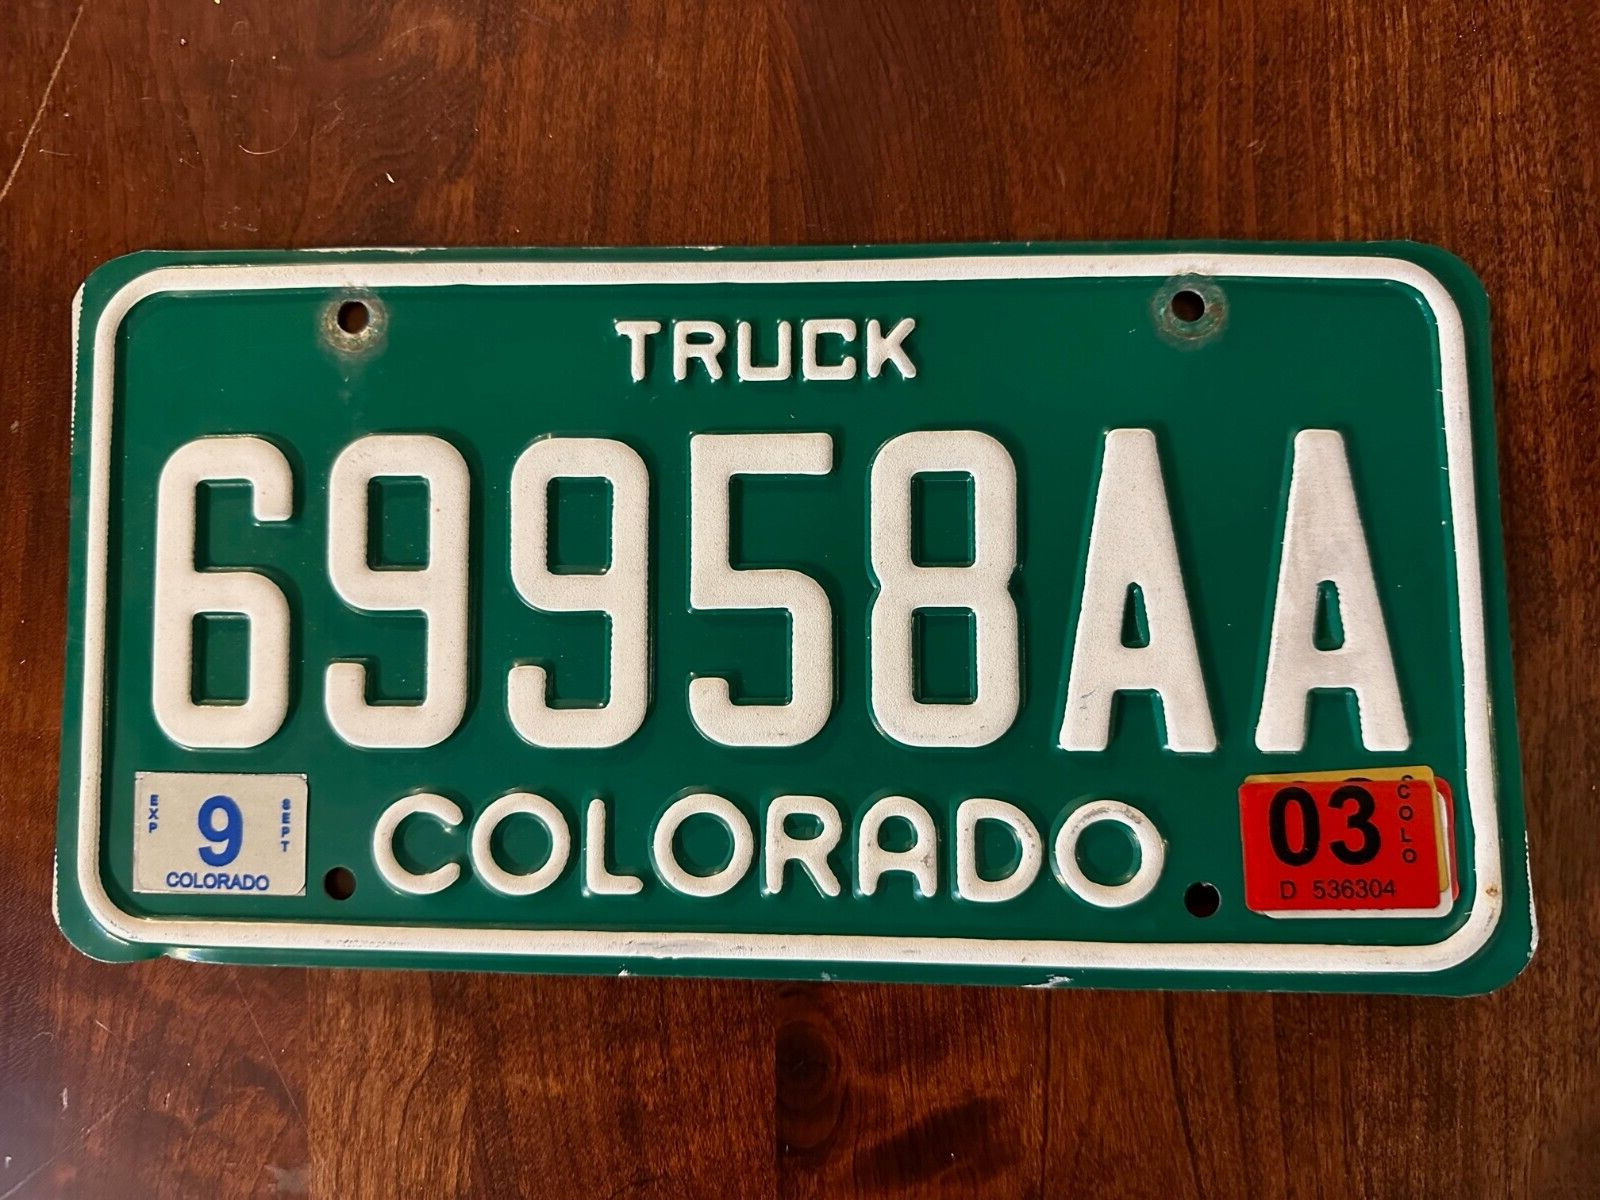 2003 Colorado Truck License Plate 69958AA Authentic Metal CO USA Rocky Mountain